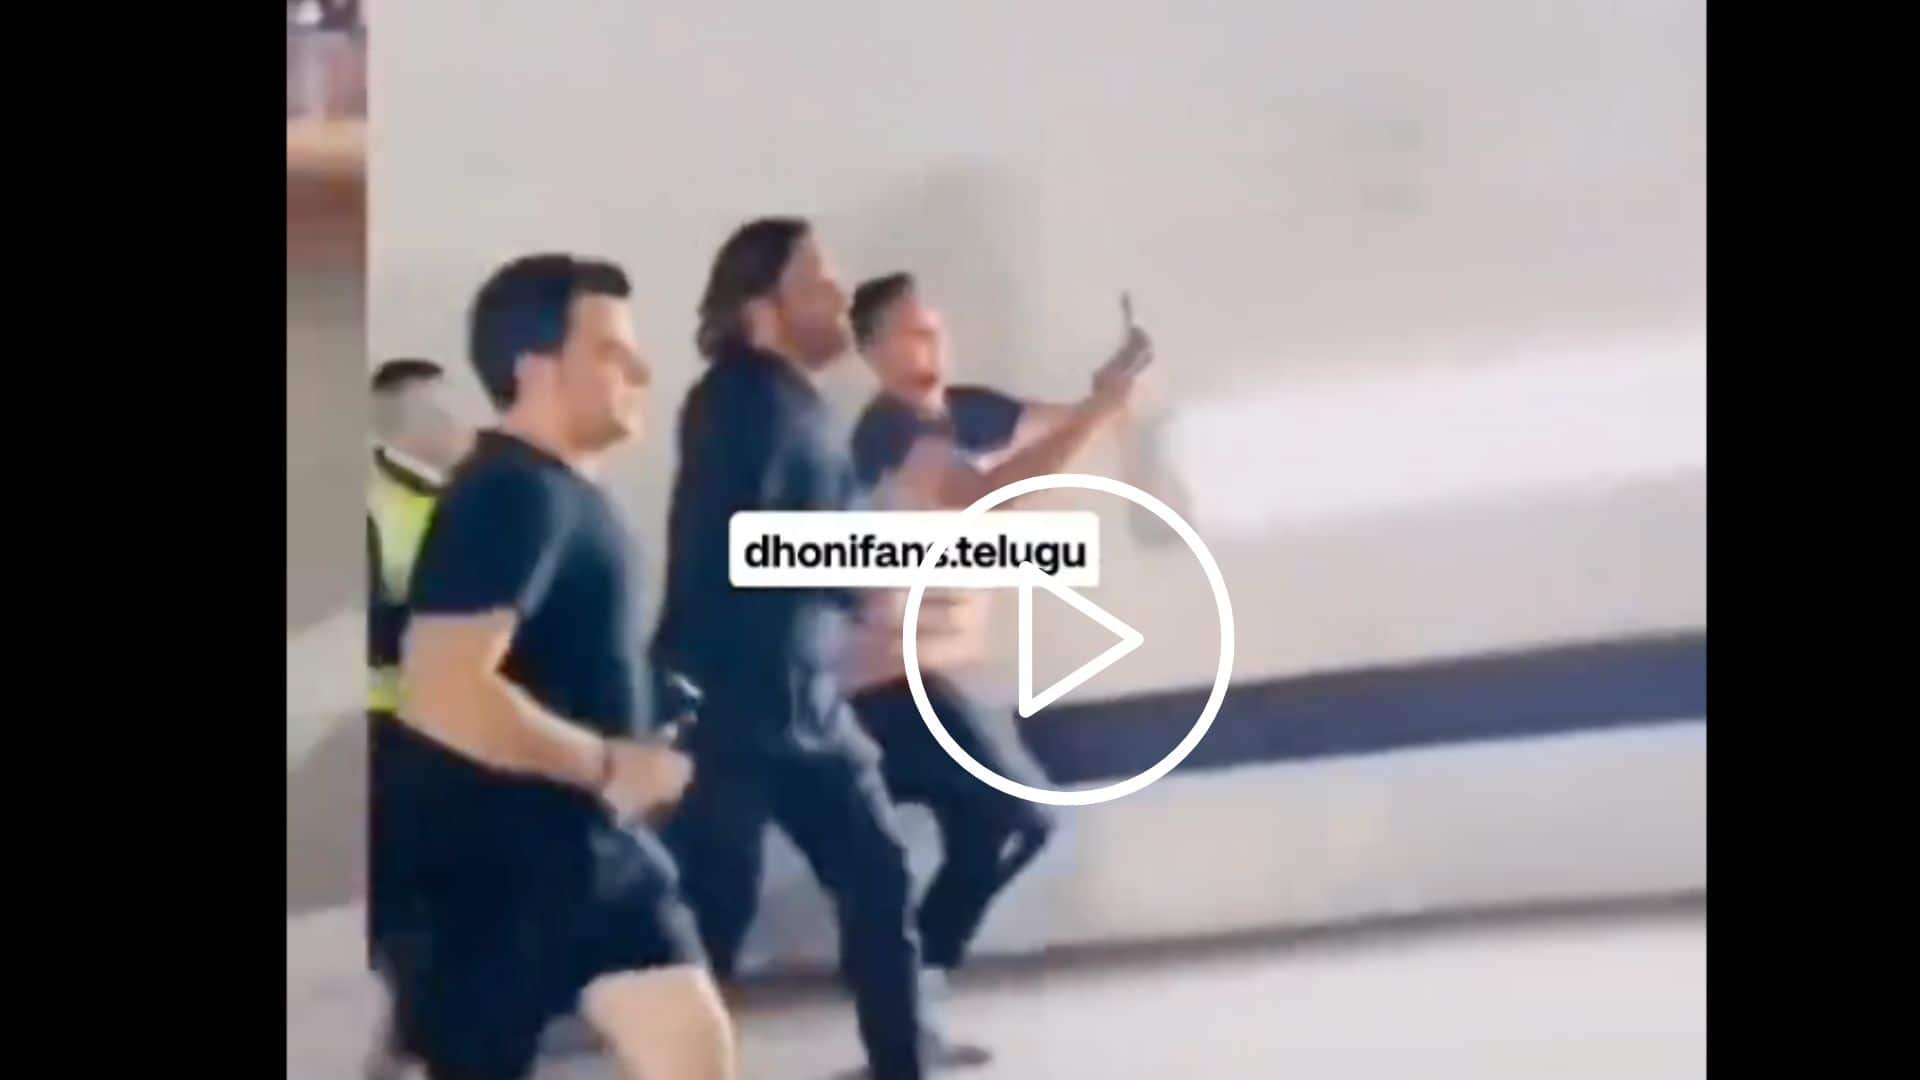 [Watch] Fans Chase Dhoni; Take Selfies With Him Running Alongside 